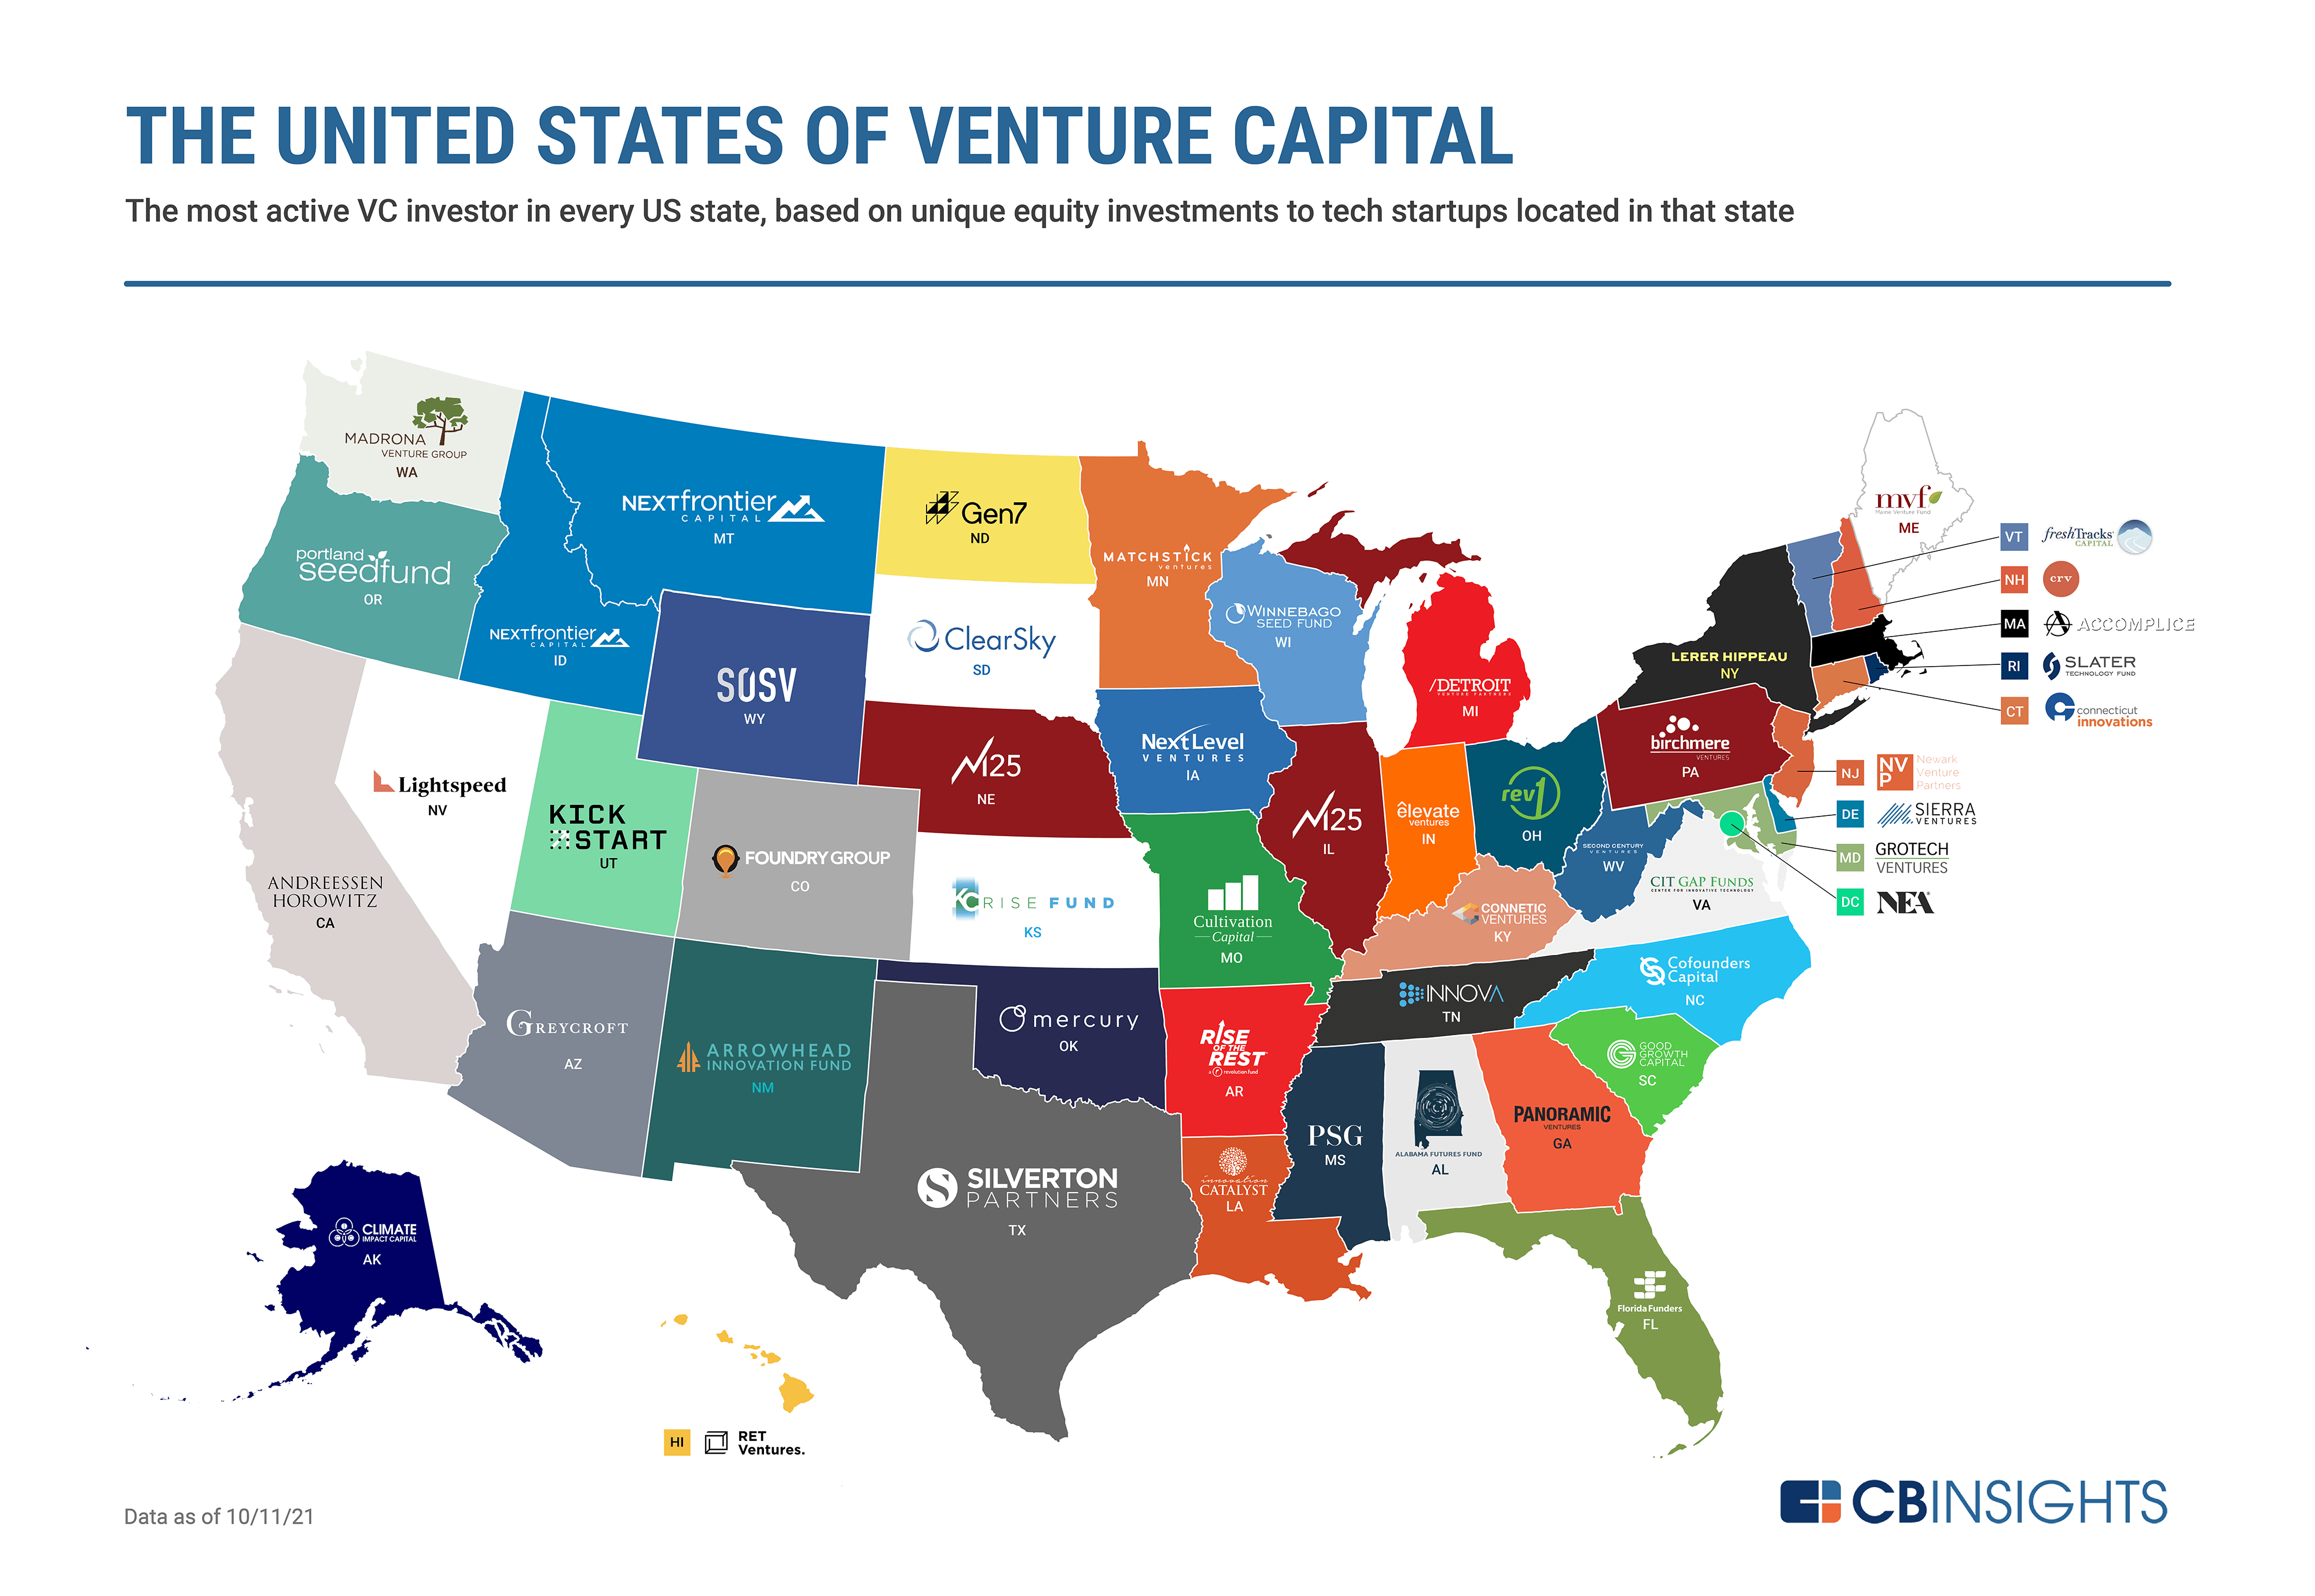 Where are the top venture debt firms located?